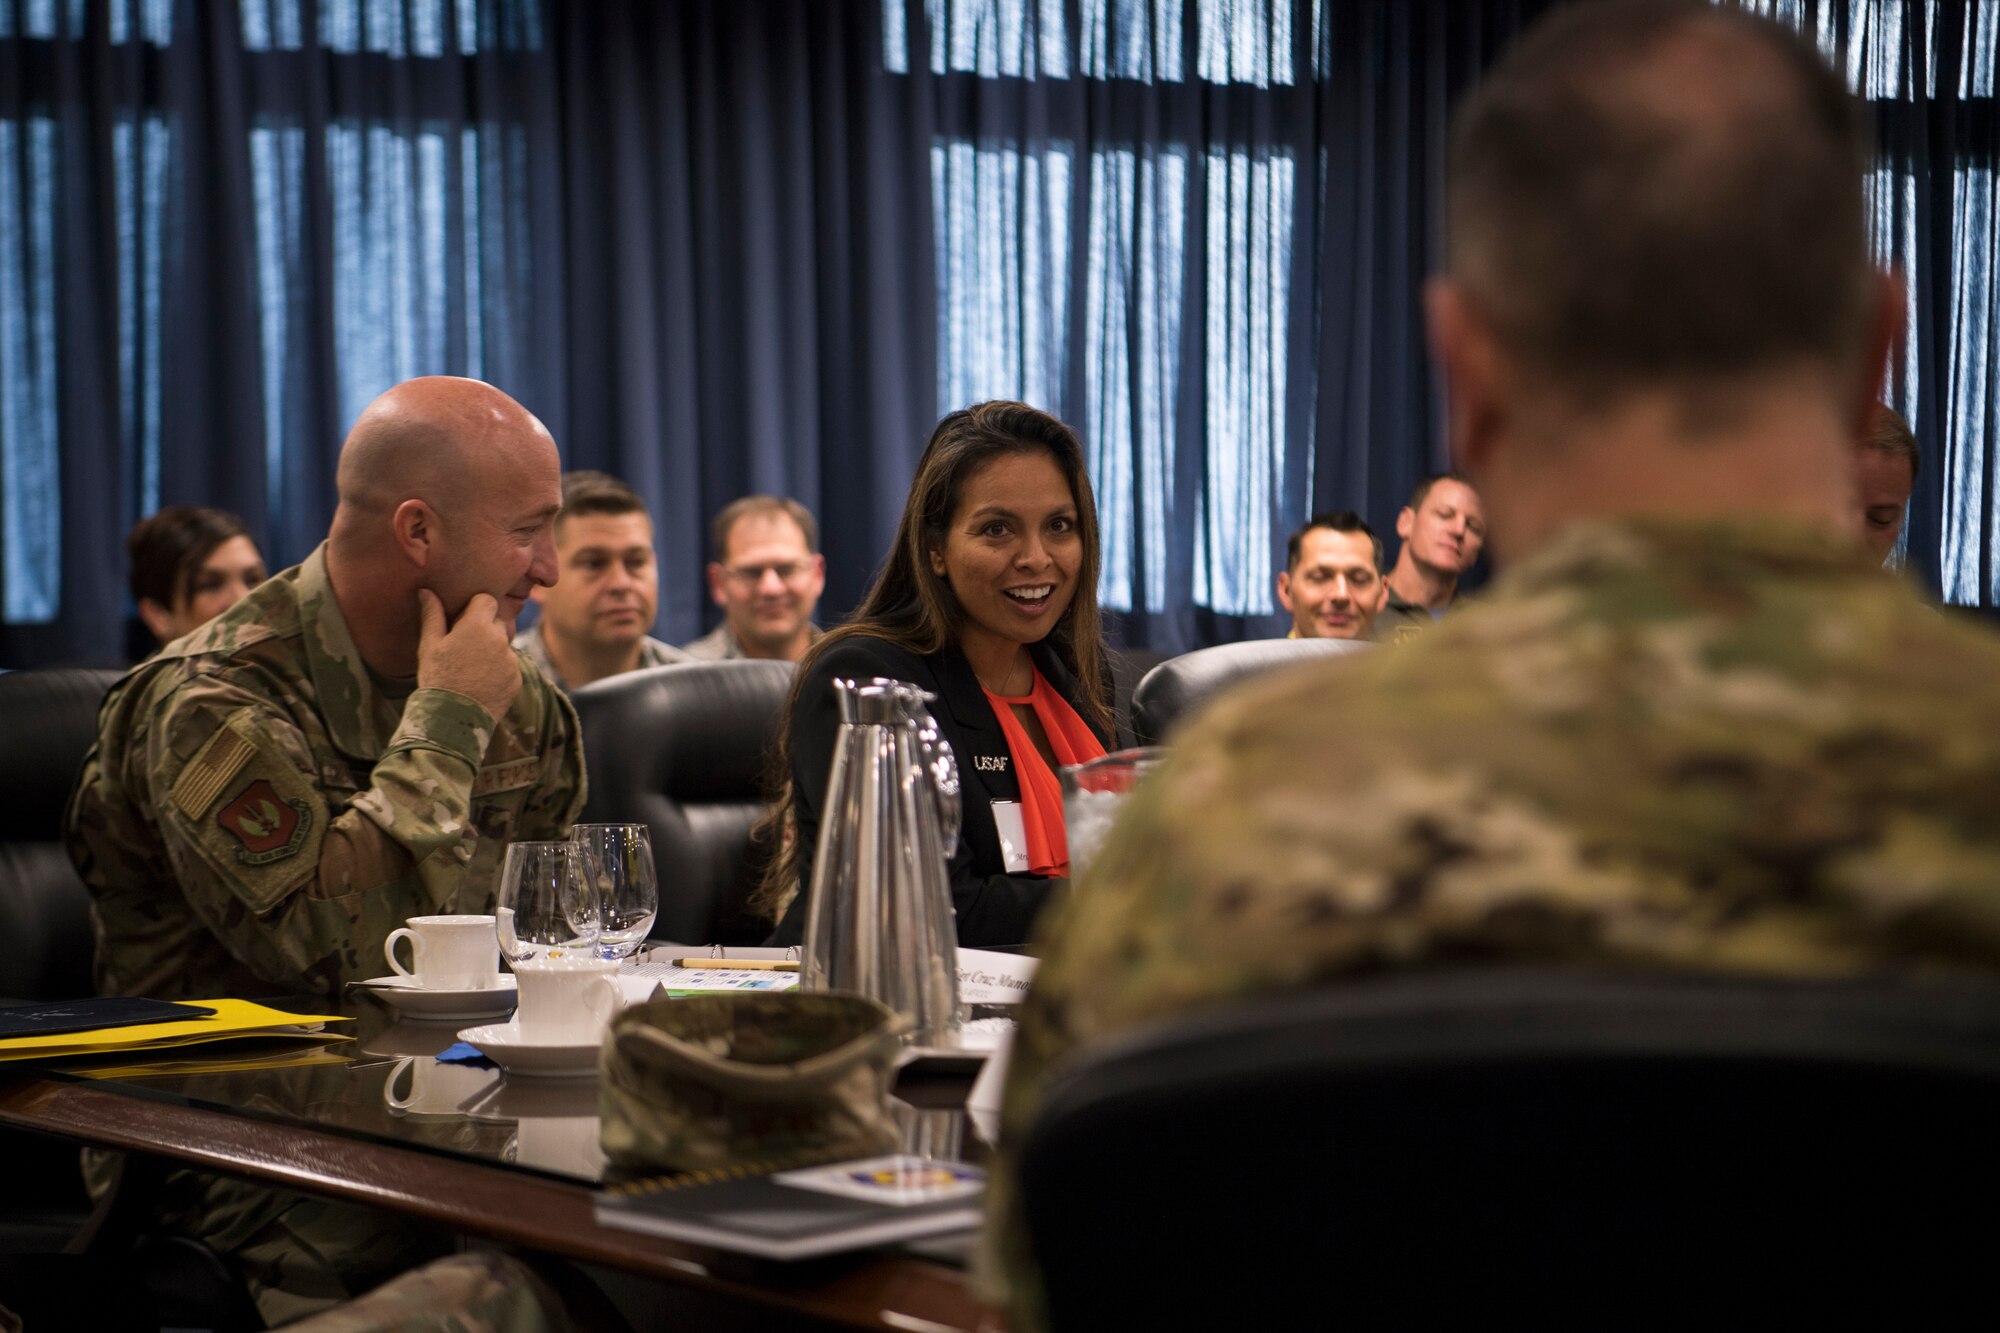 Lora Cruz Munoz, spouse of Third Air Force Command Chief Master Sgt. Anthony Cruz Munoz, asks Brig. Gen. Mark August, 86th Airlift Wing commander, a question during a tour of the 86th AW Oct. 5, 2018, at Ramstein Air Base, Germany. Key spouses attended a separate immersion tour throughout the day. (U.S. Air Force photo by Senior Airman Devin M. Rumbaugh)